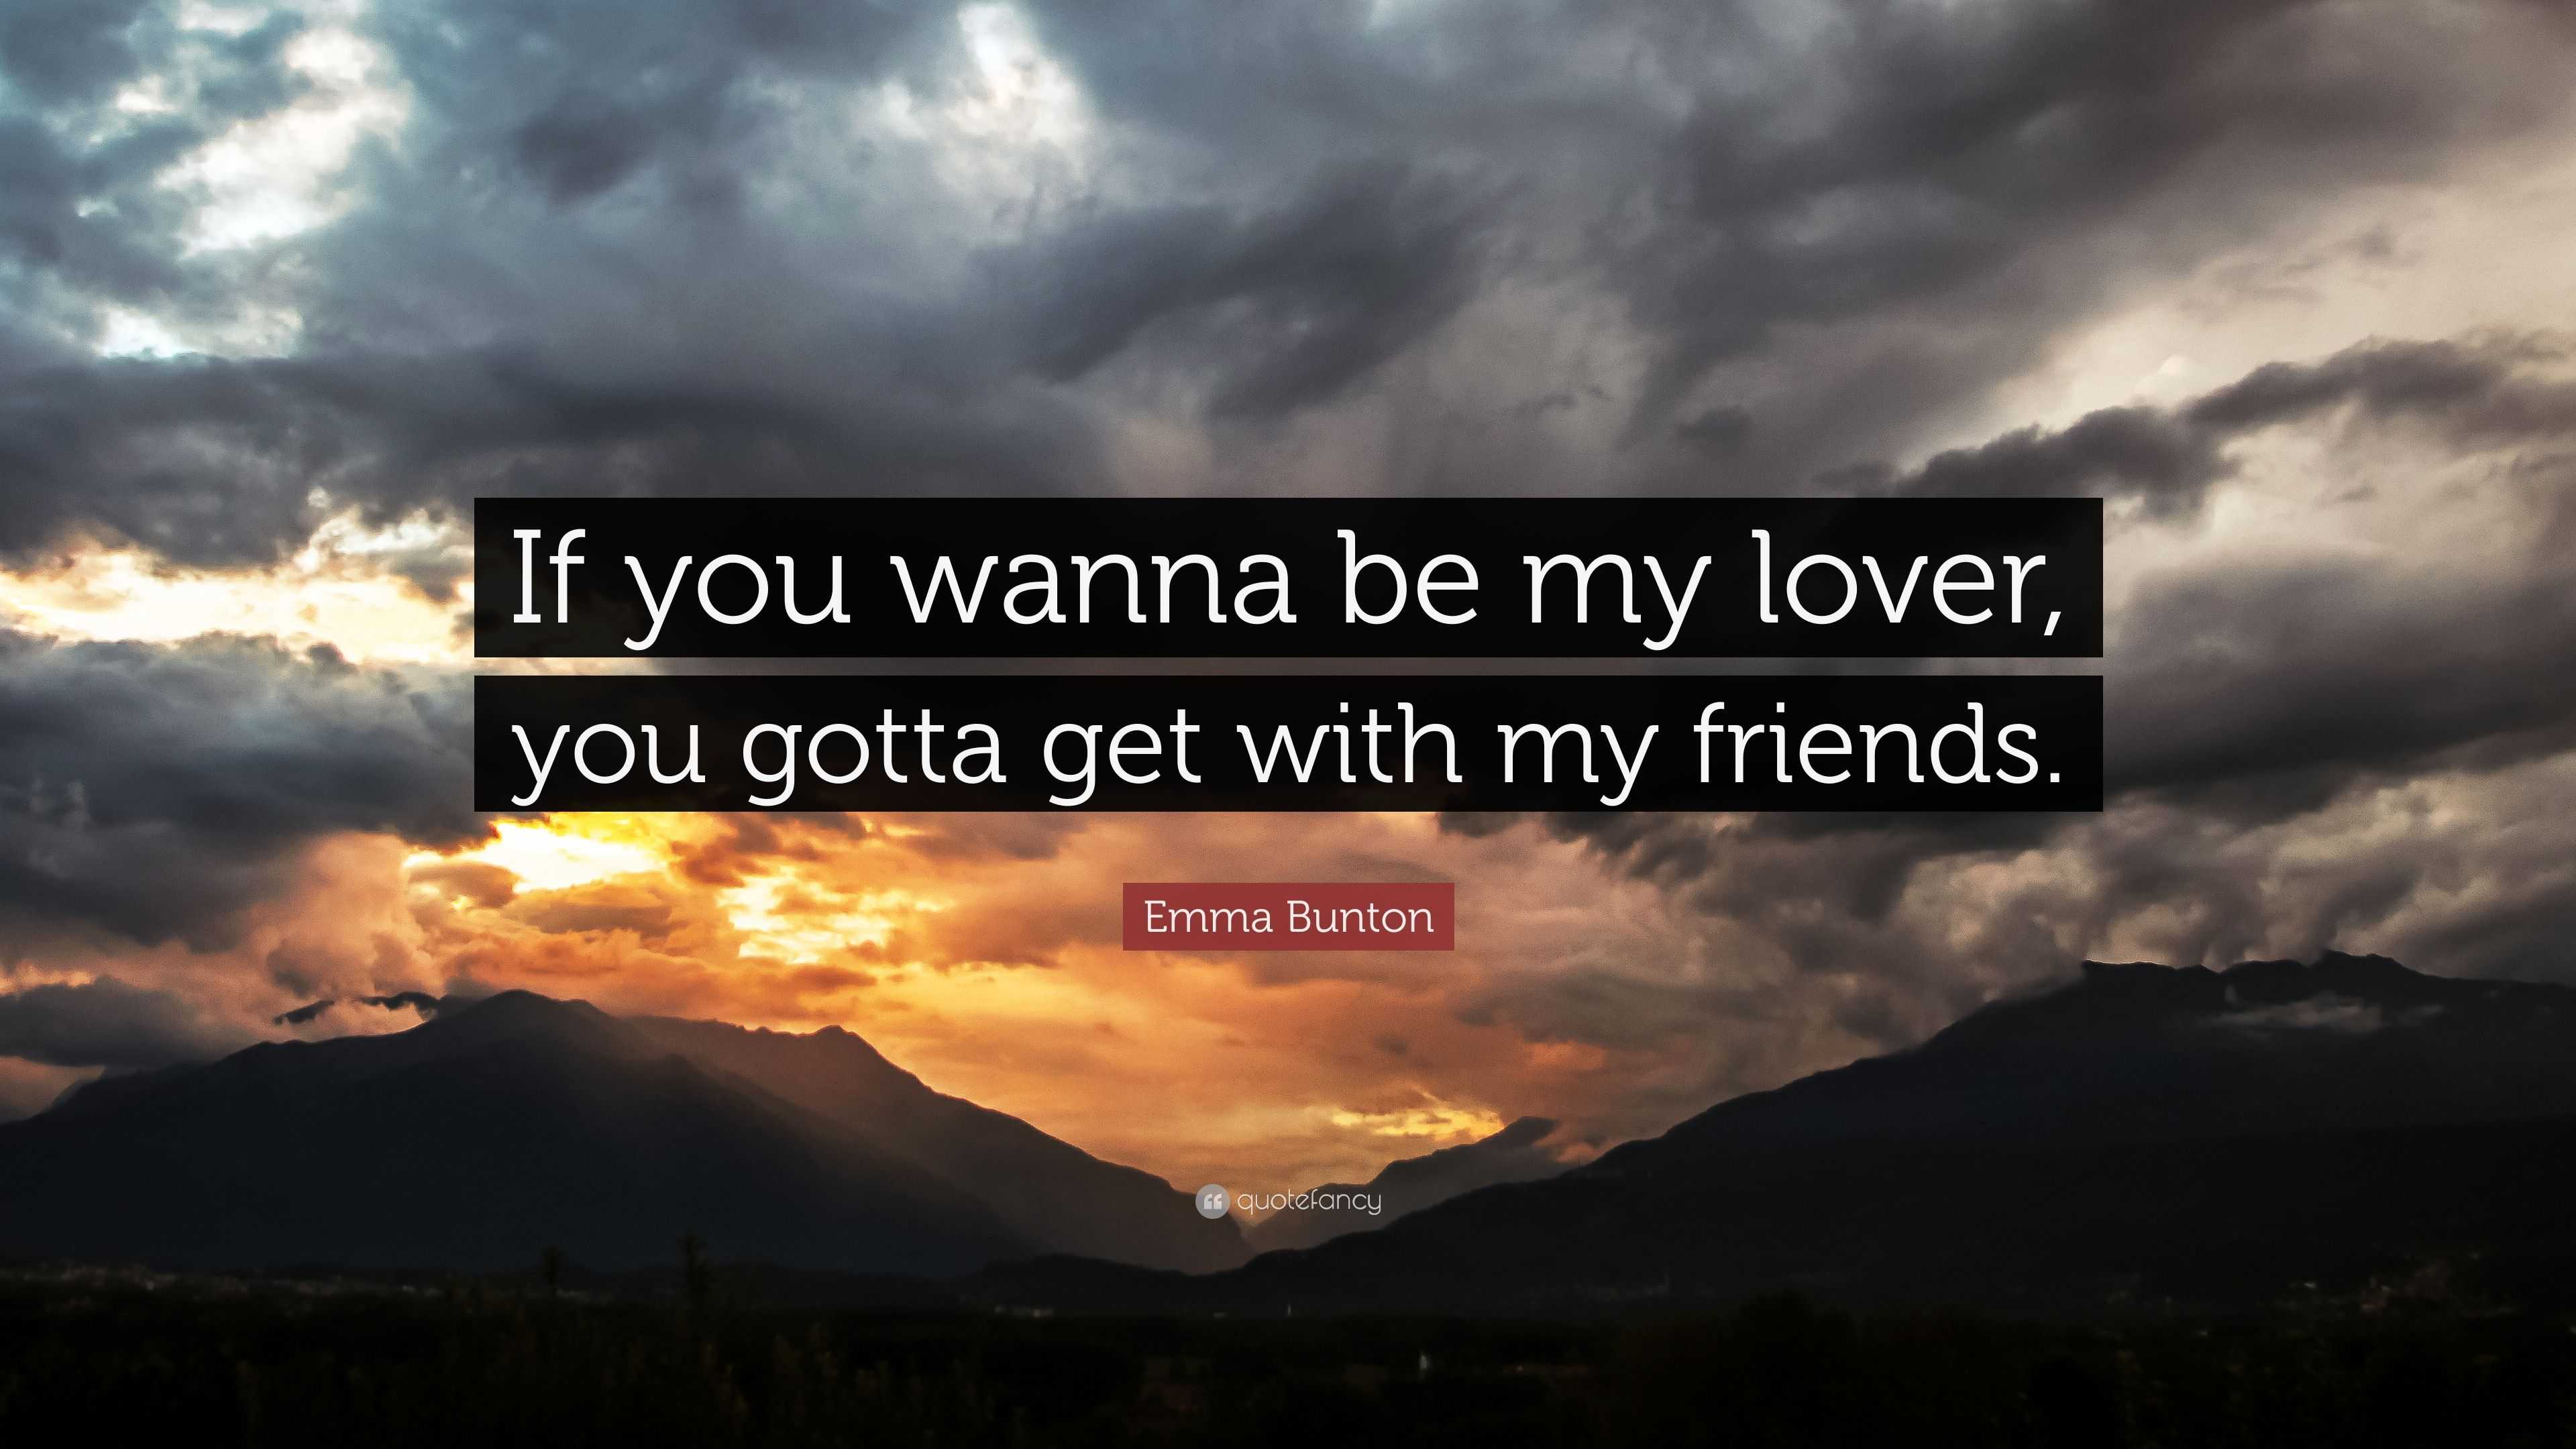 Emma Bunton Quote “if You Wanna Be My Lover You Gotta Get With My Friends” 